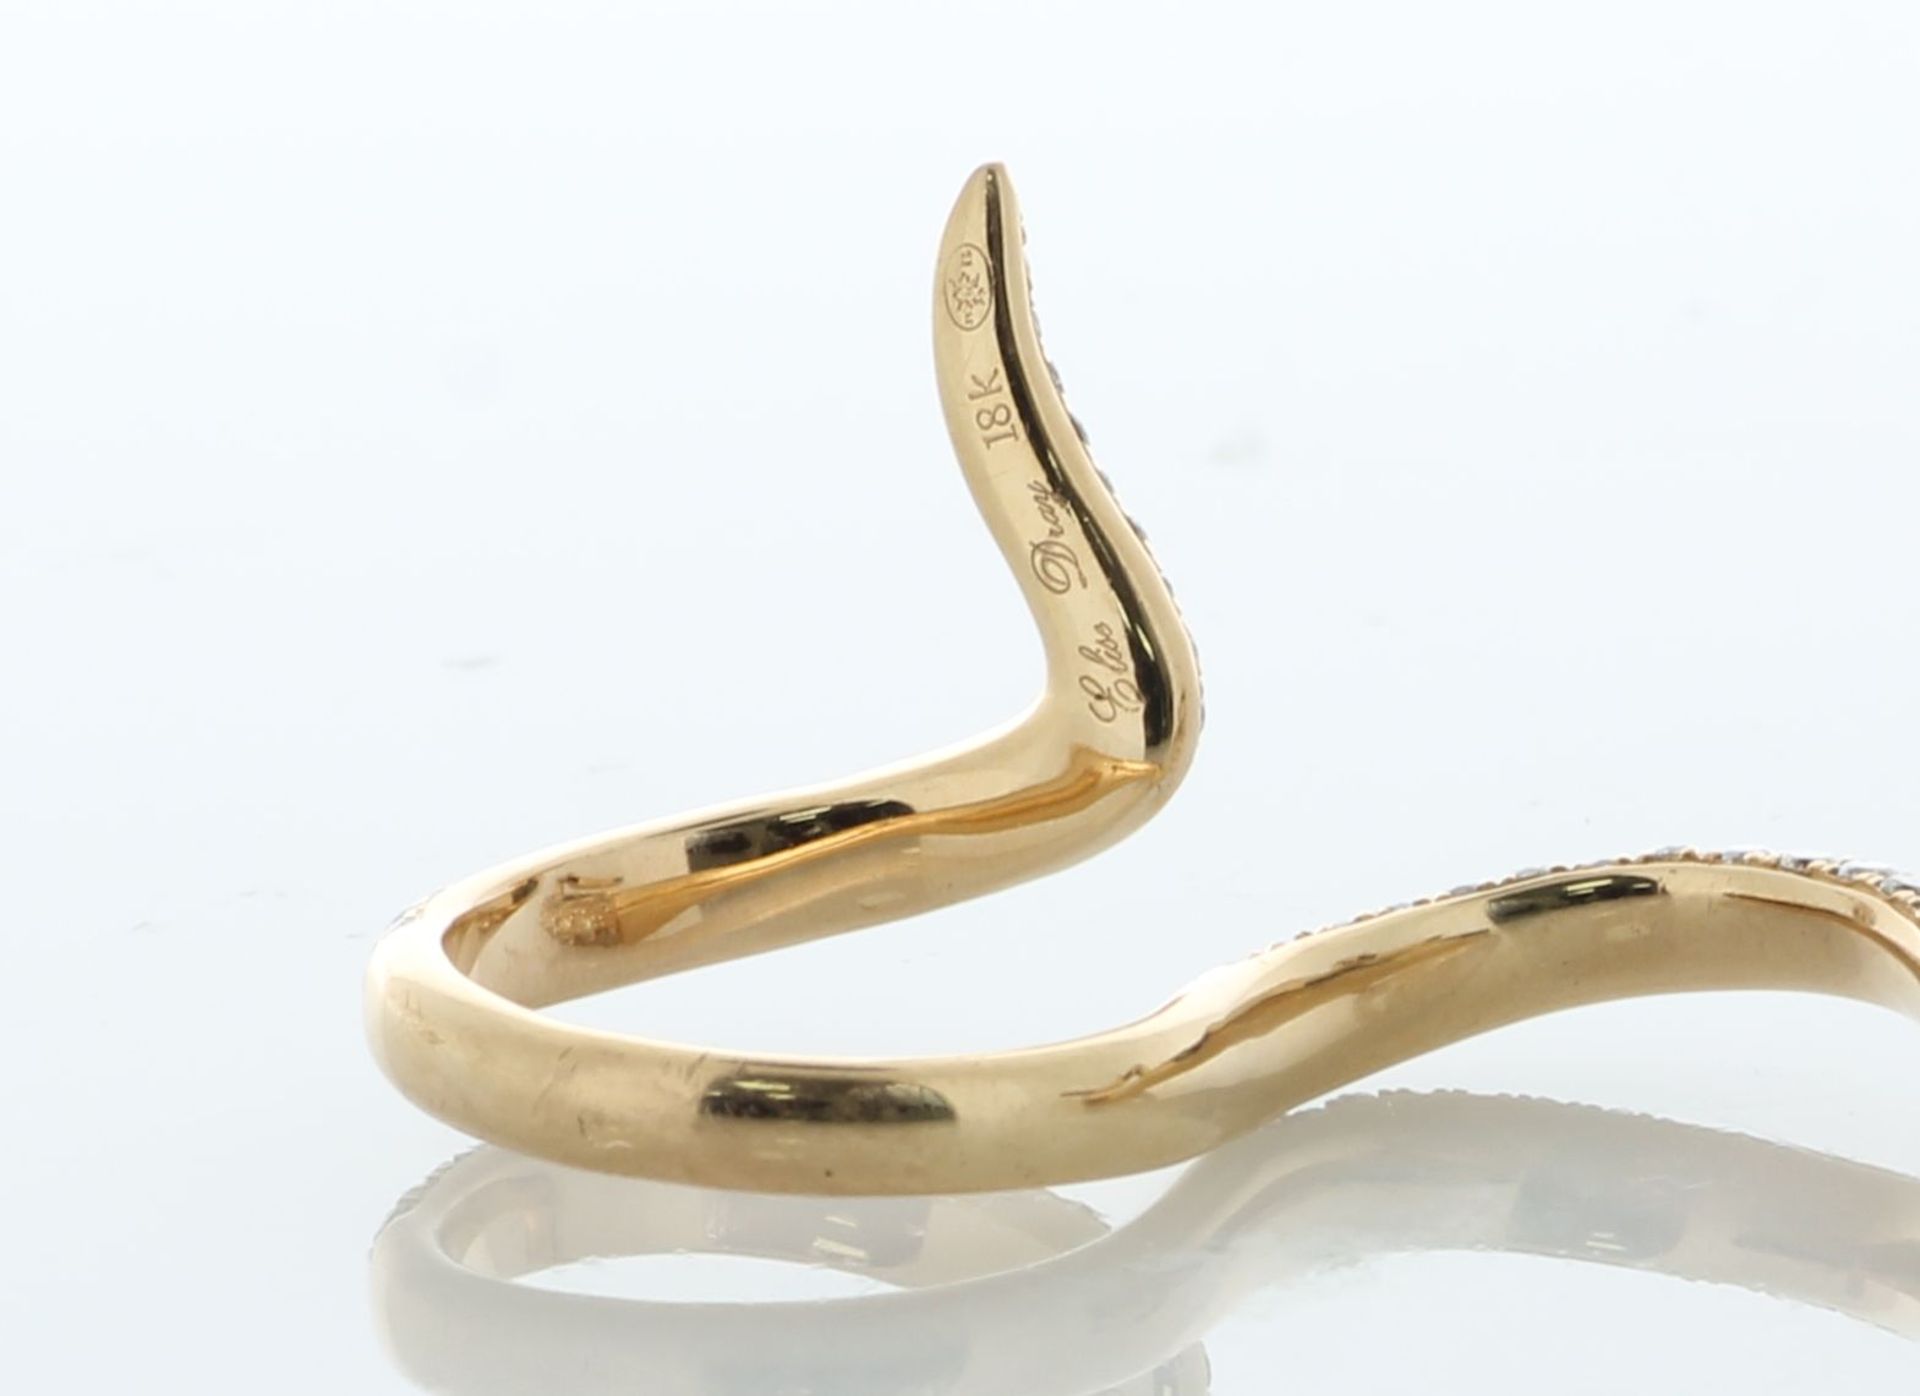 £12,500.00 Elise Dray 18ct Rose Gold Snake Ring Hand Pendant 3.00 Carats - Image 5 of 6